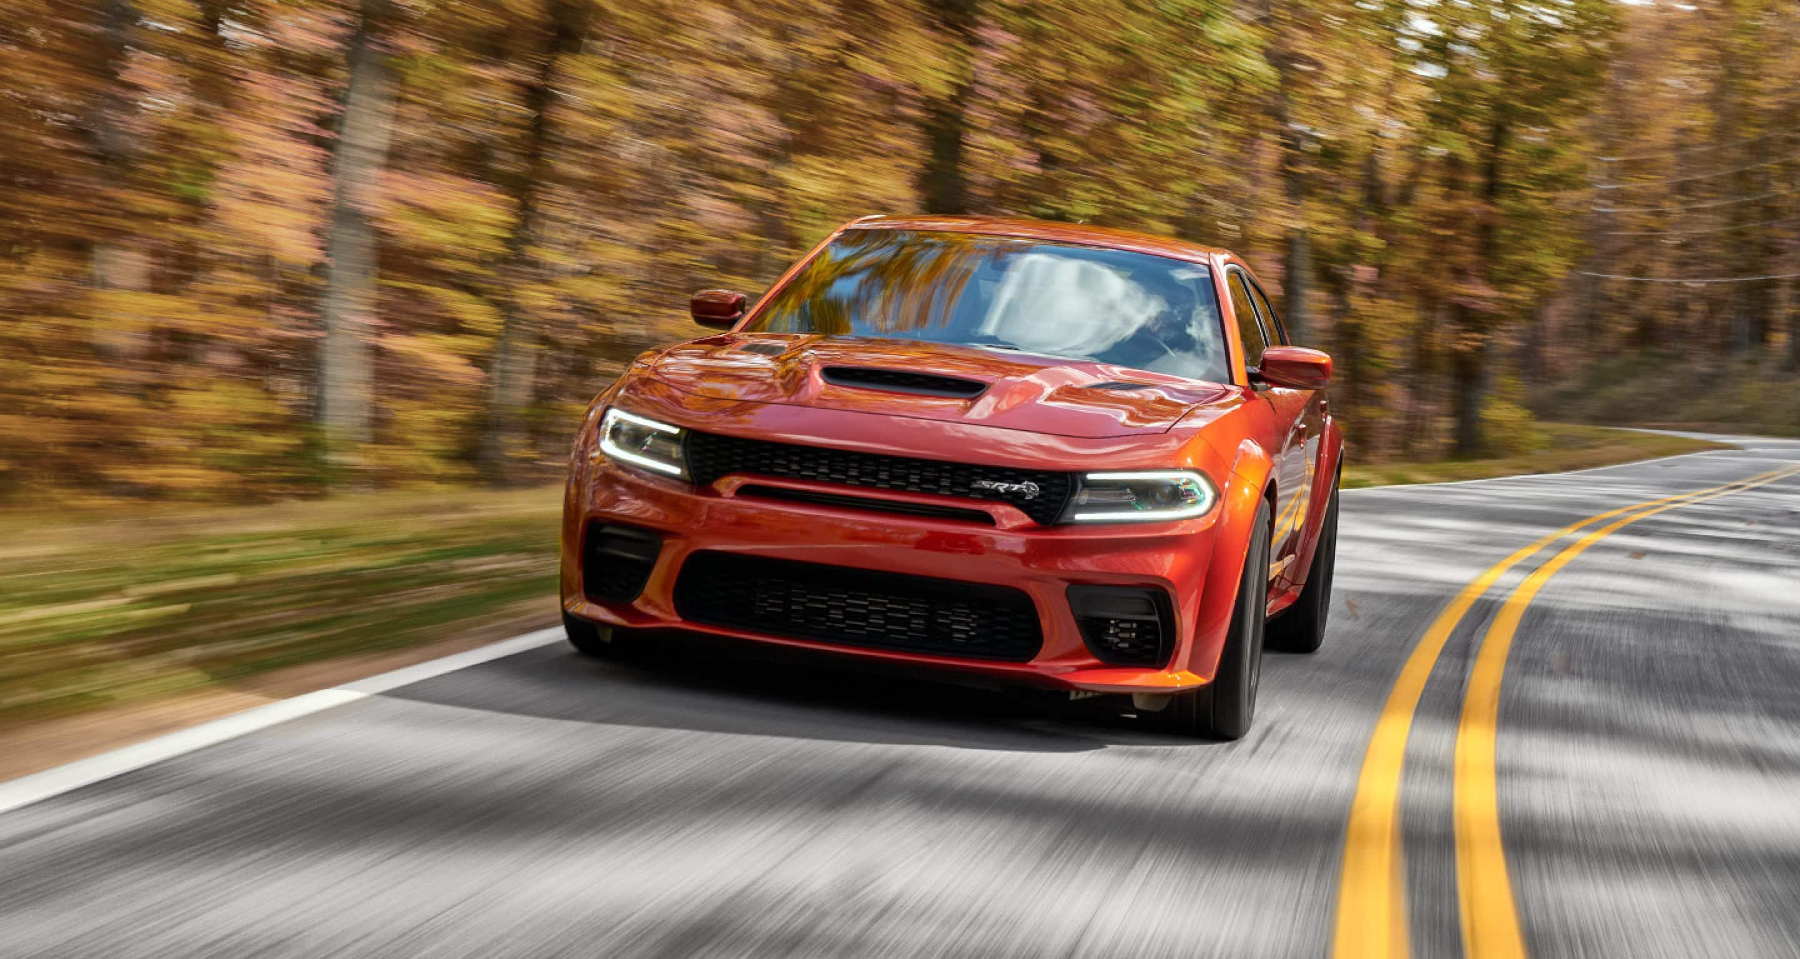 Dodge Charger Drives down road surrounded by forest